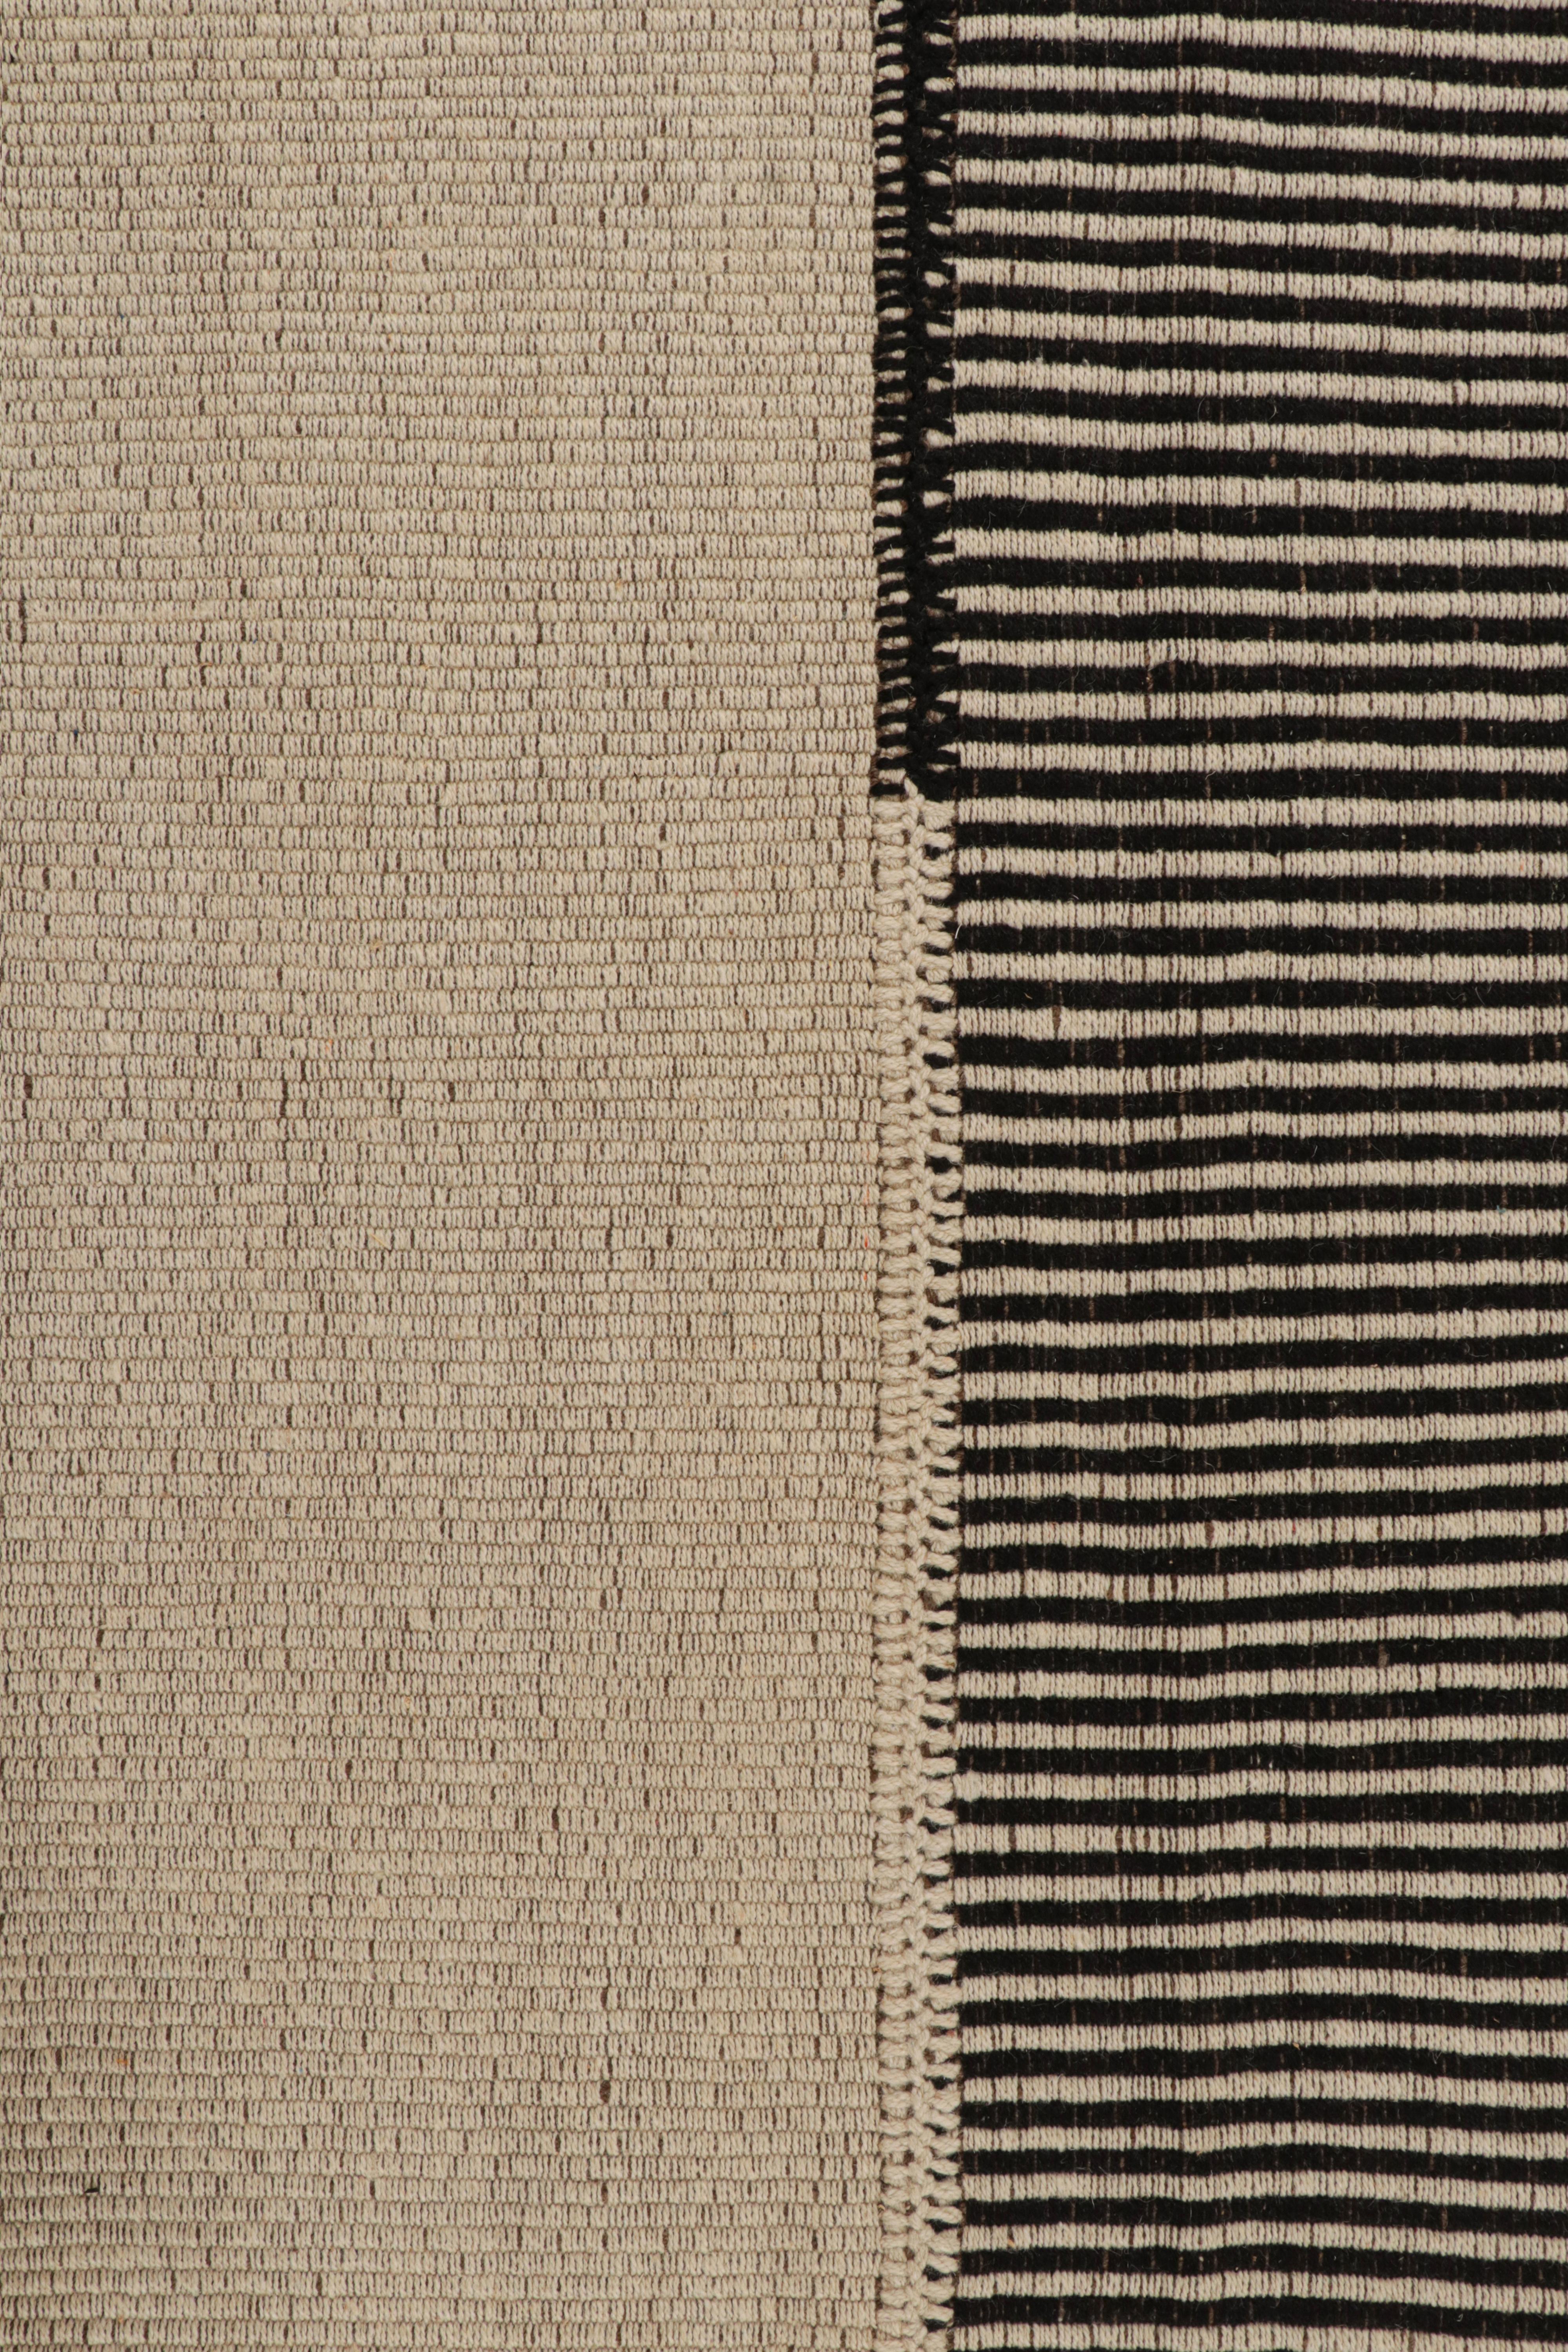 Modern Rug & Kilim’s Contemporary Kilim in Black & Beige Stripes with Brown Accents For Sale